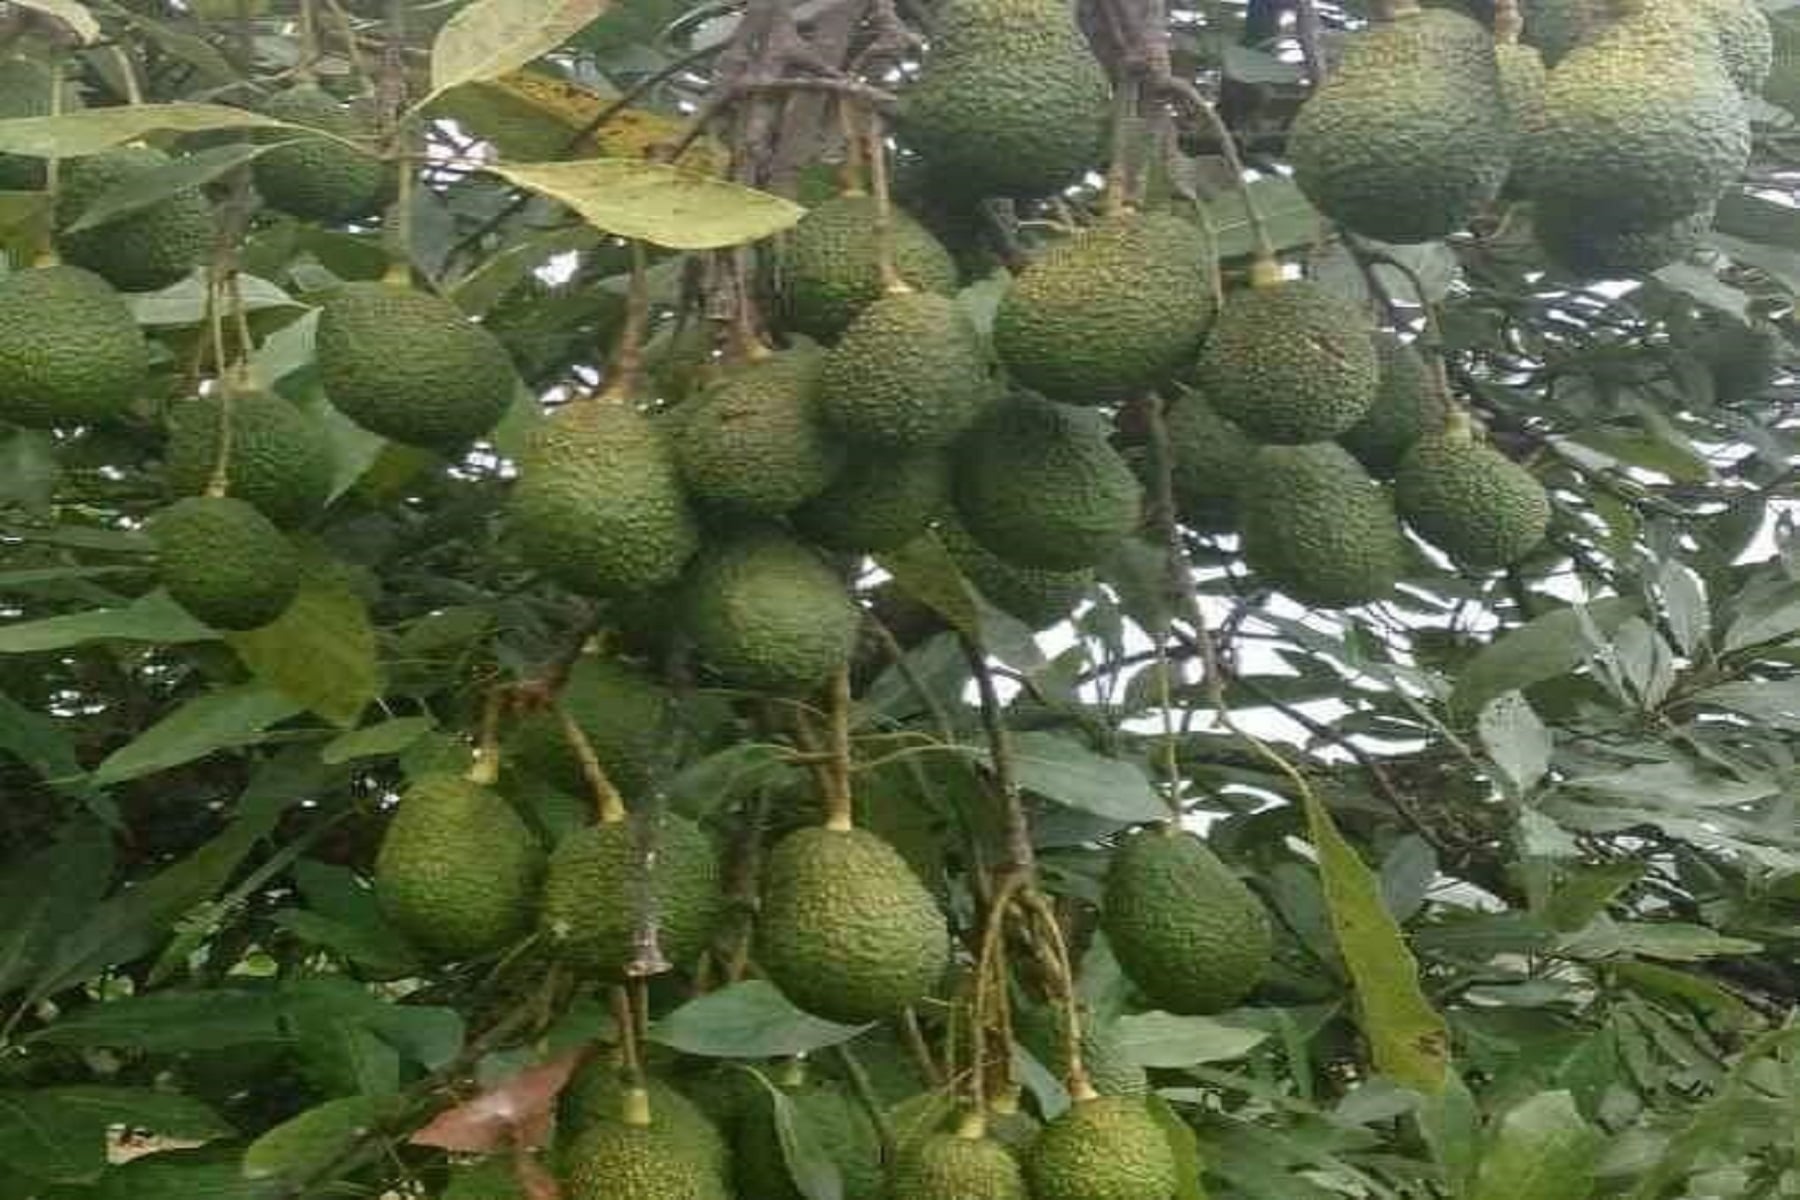 avocados still in gardens read for harvest and sale